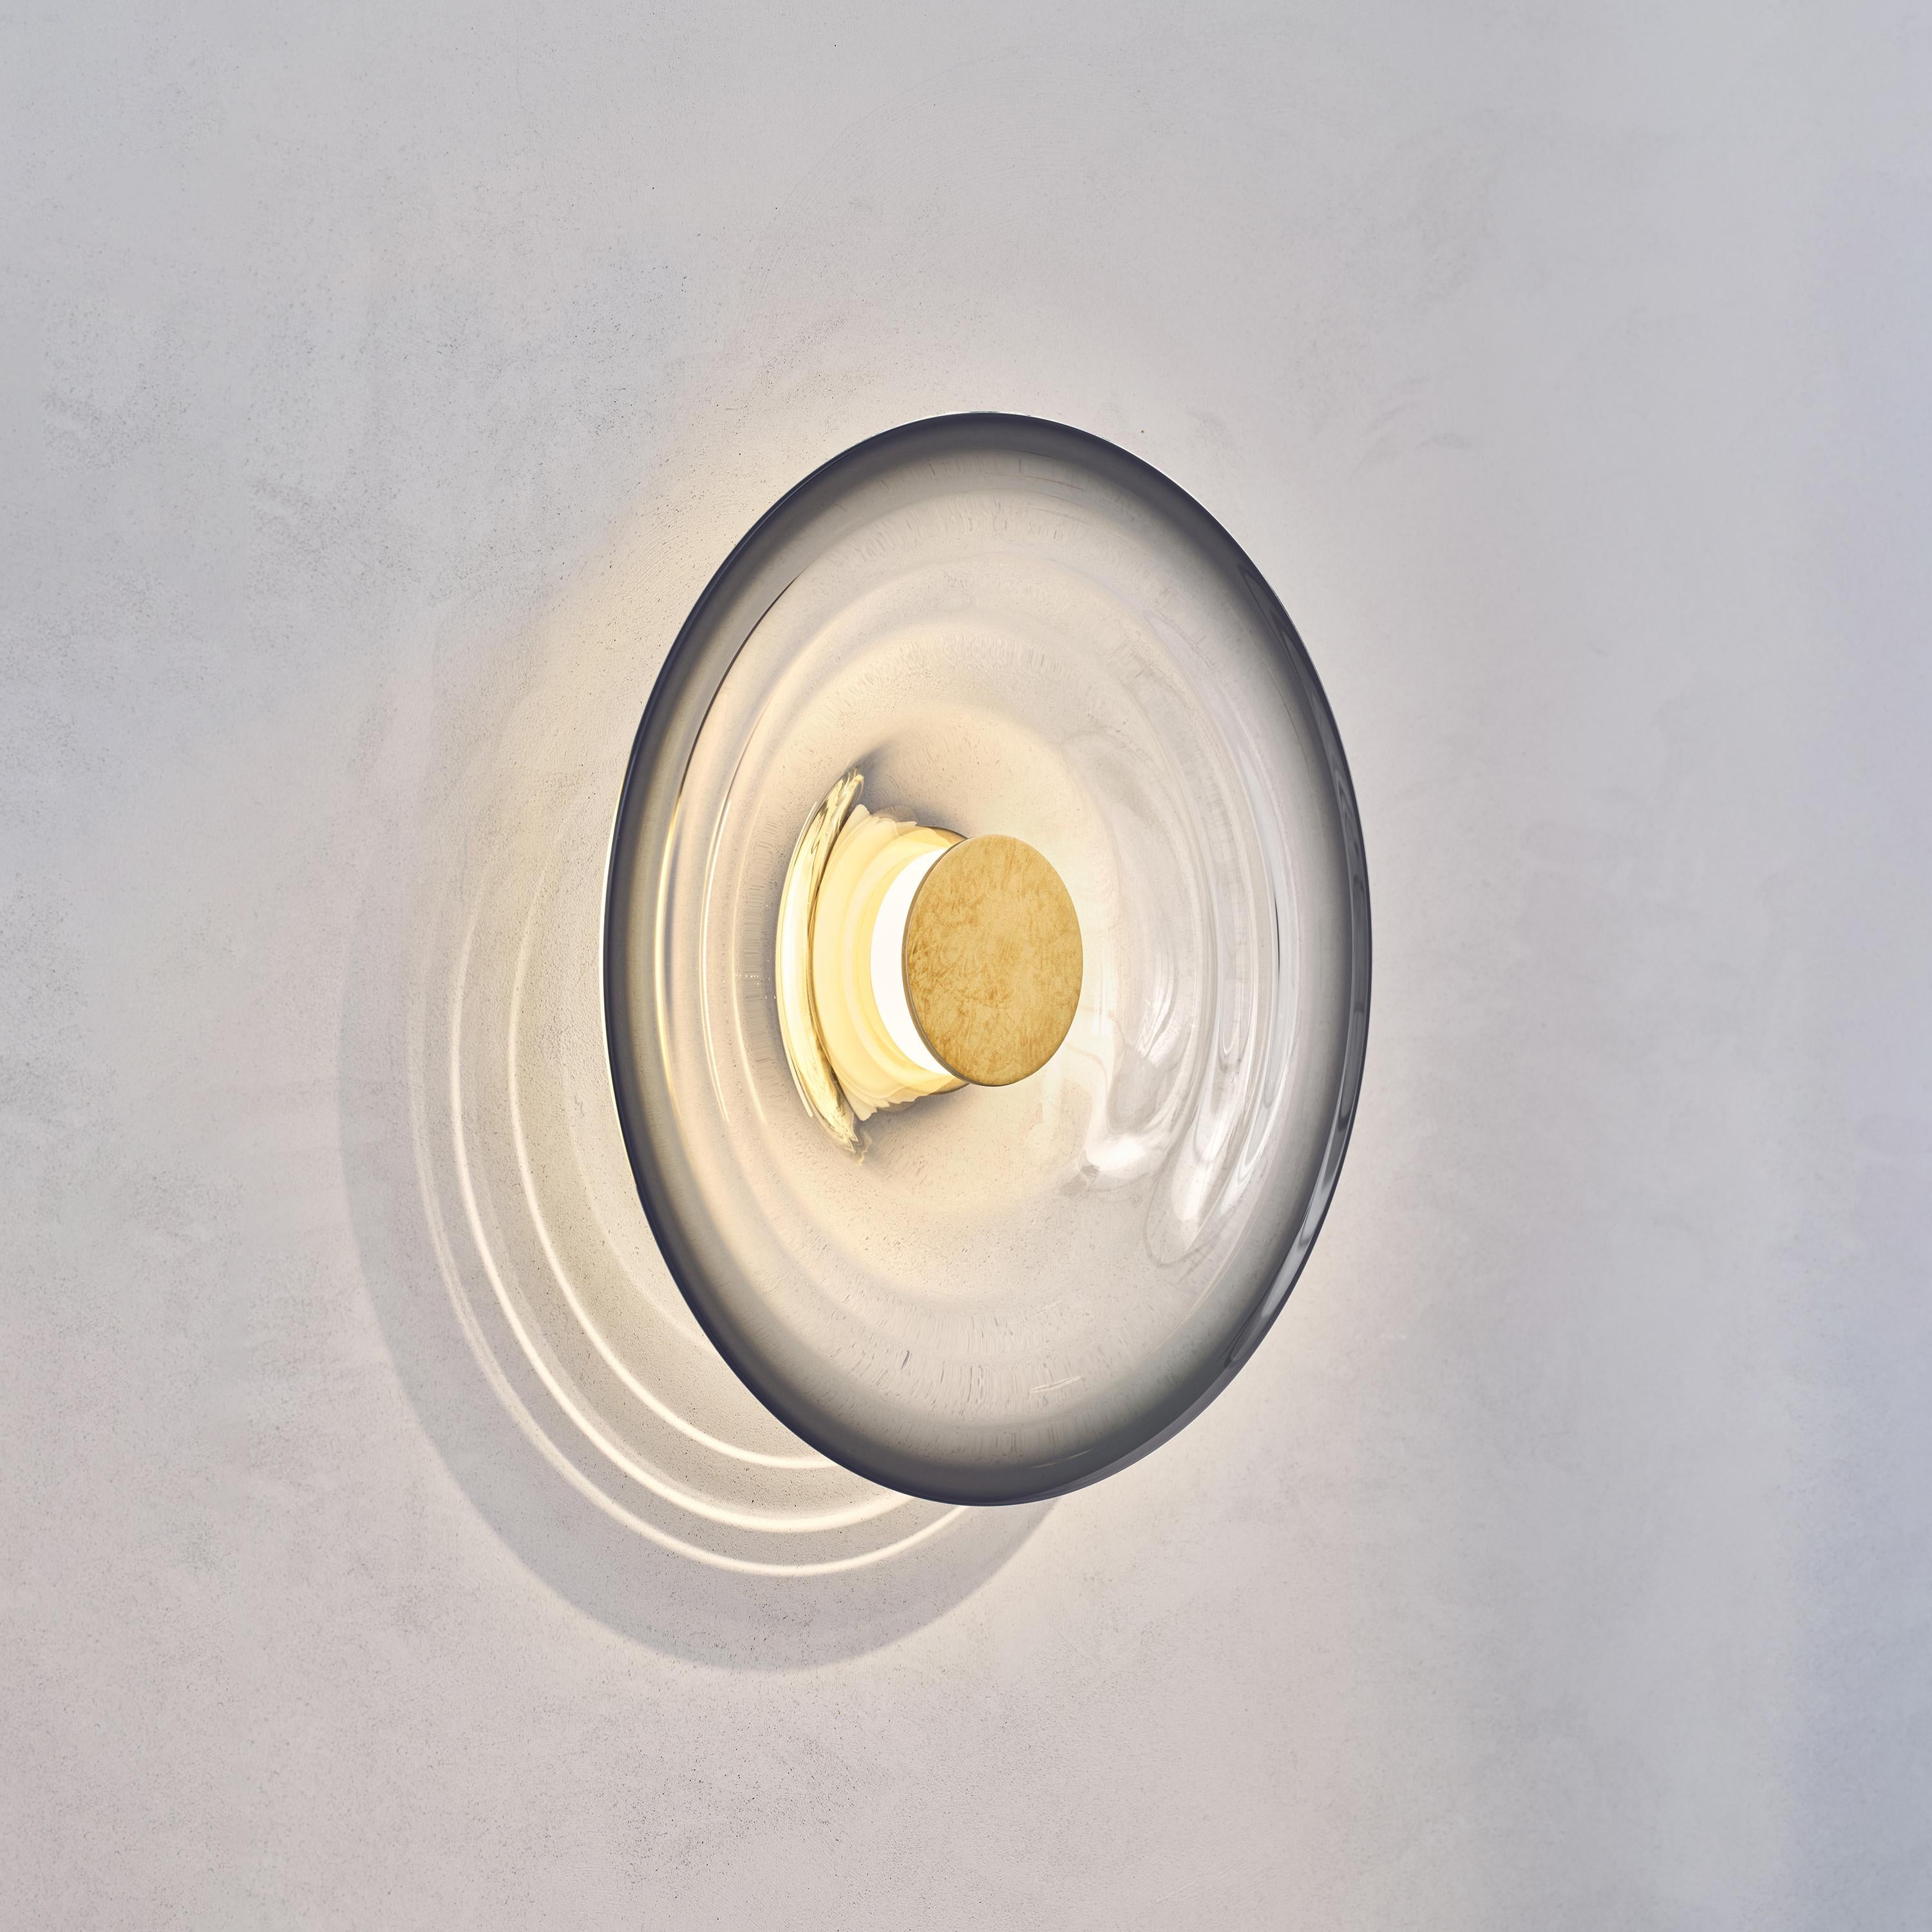 British 'Liquid Smoke' Hand-Blown Glass & Aged Brass Contemporary Wall Light, Sconce For Sale